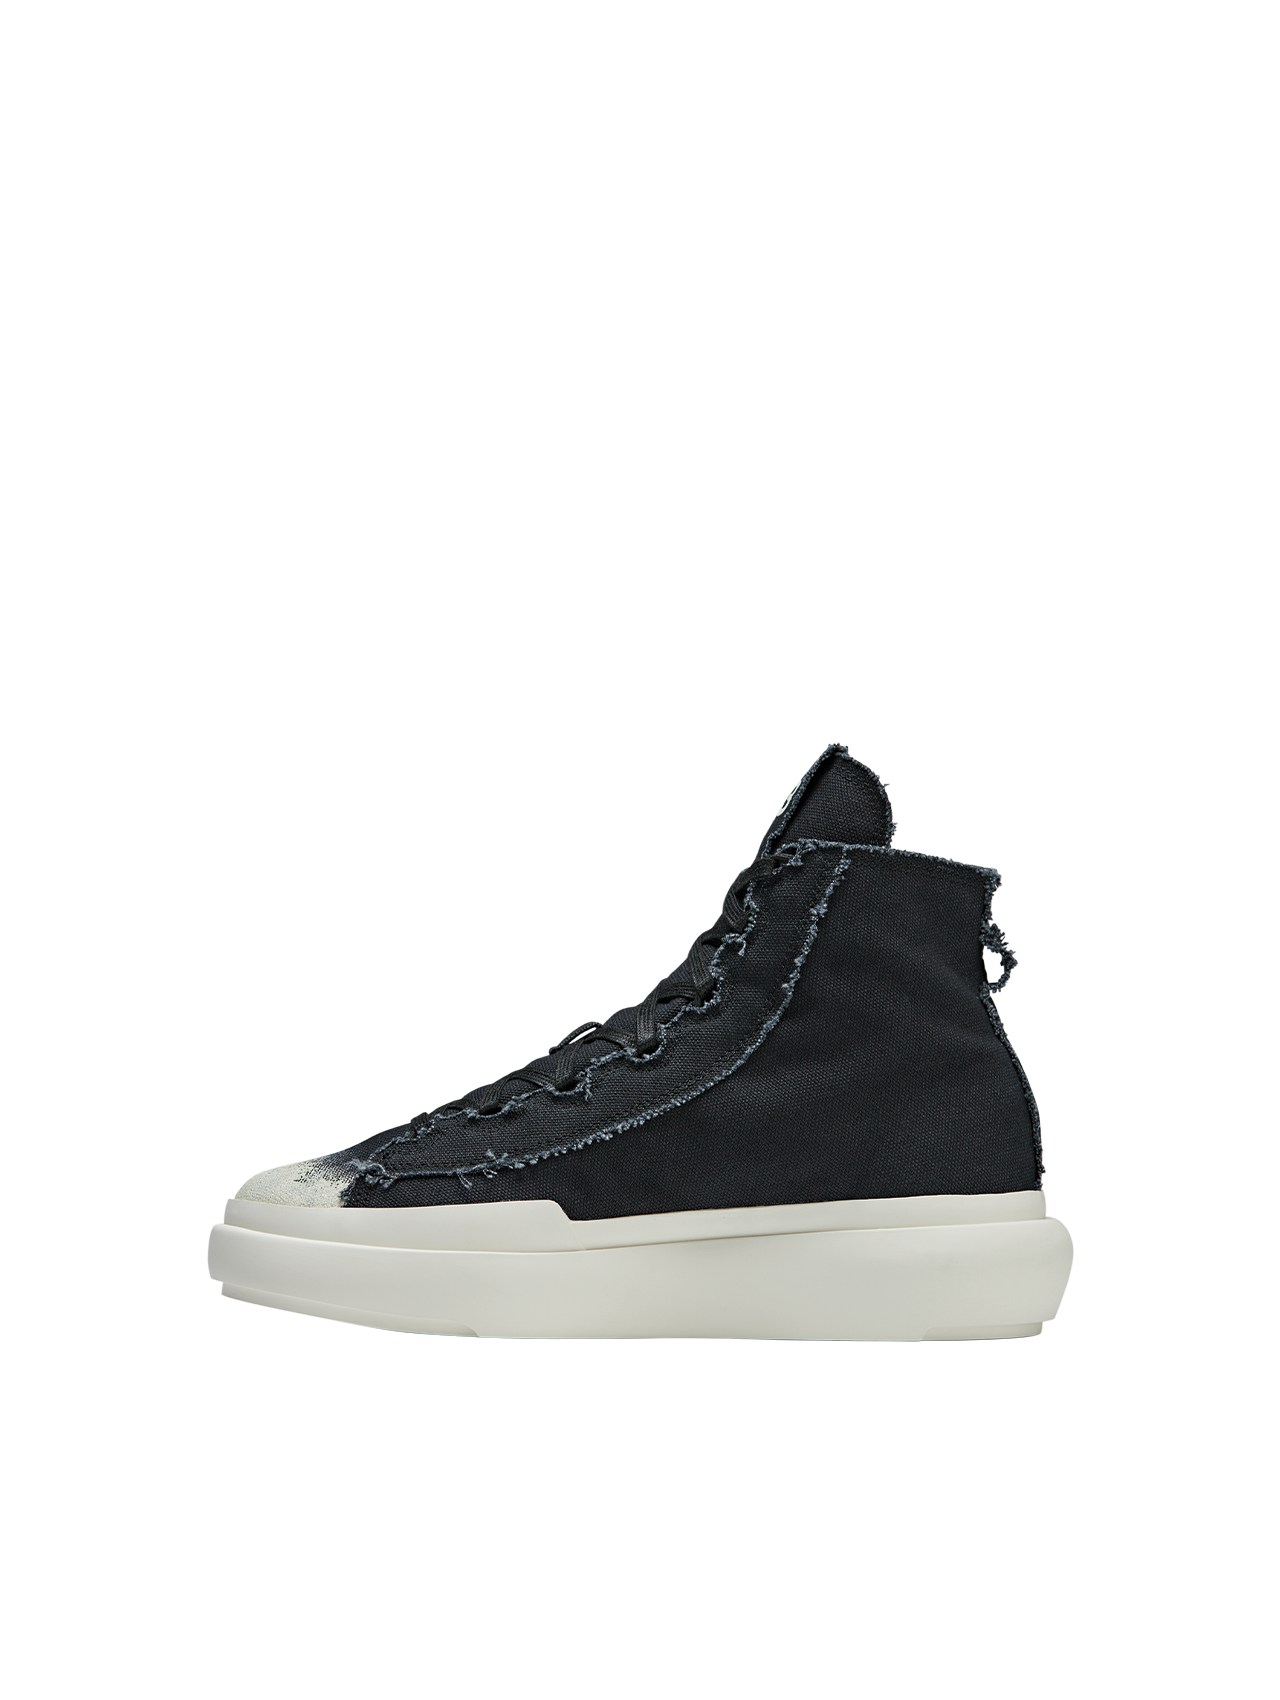 Y-3 Black/Off White Nizza High-Top Sneakers